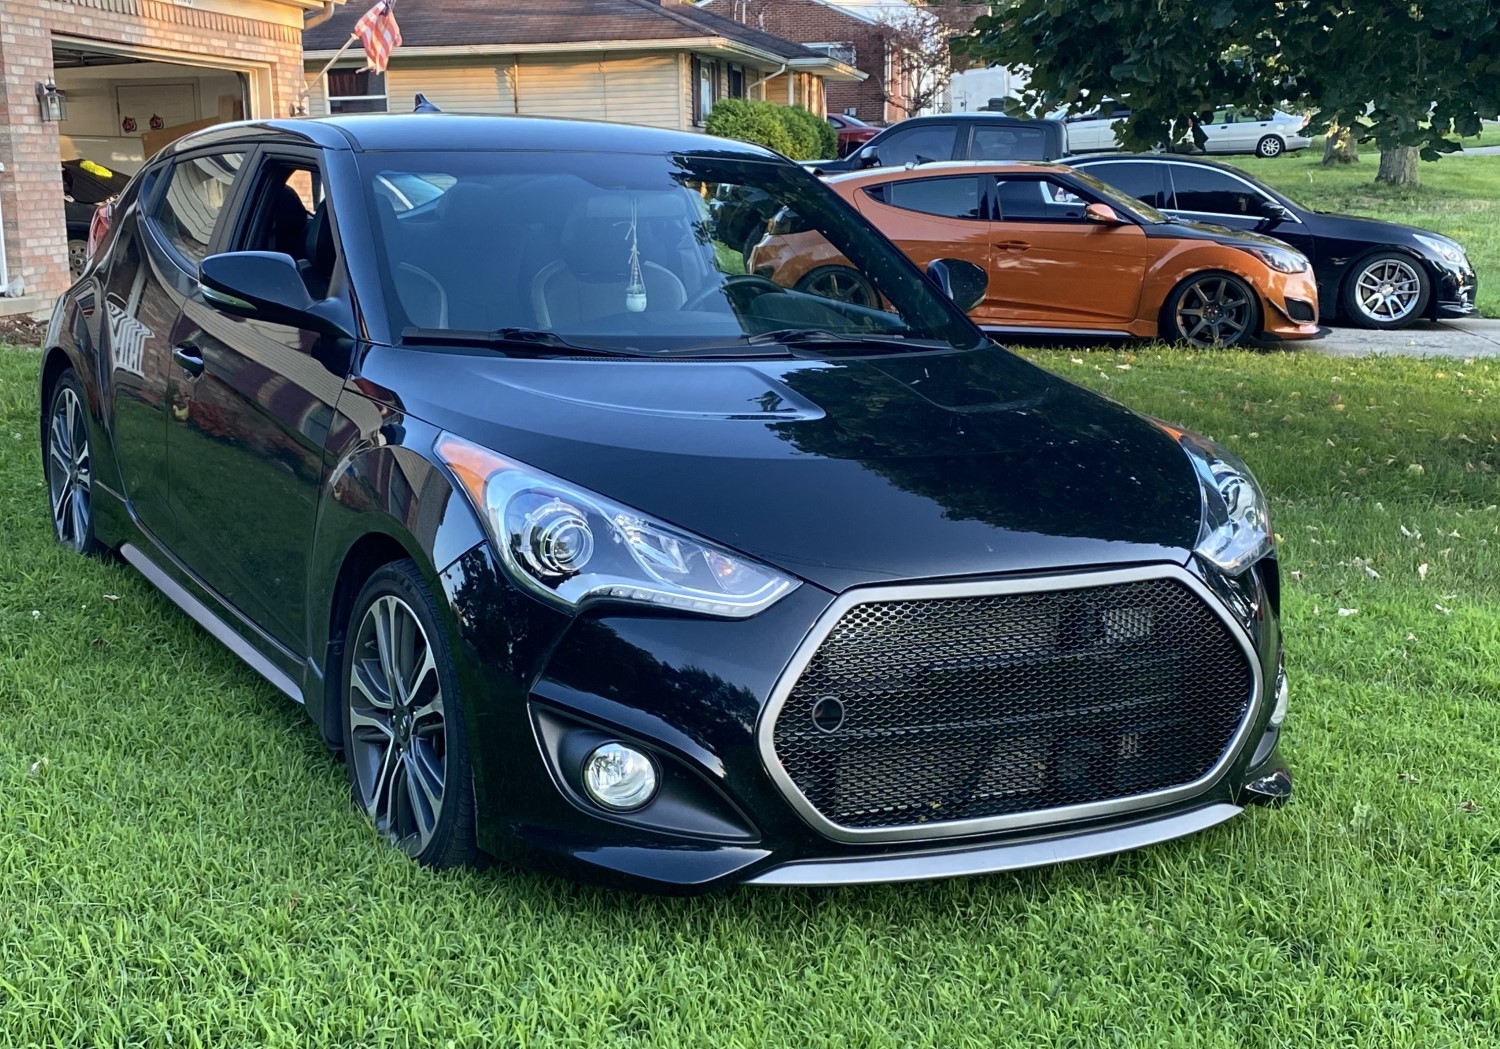 Black on Silver: Custom Mesh Grille for Your First Gen Veloster Turbo